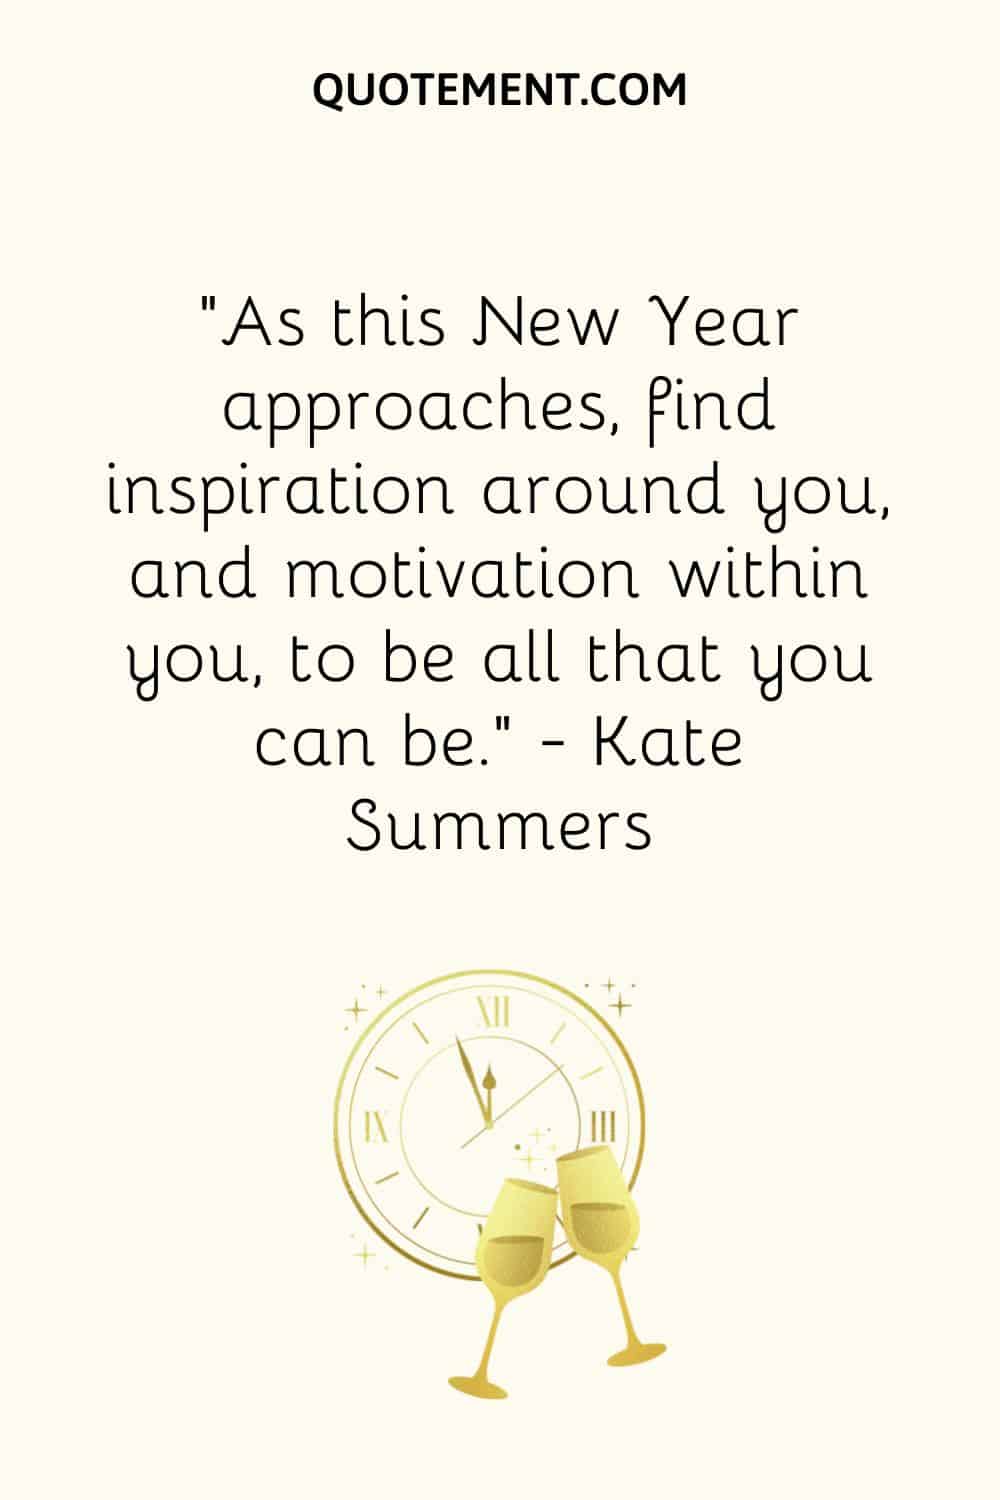 “As this New Year approaches, find inspiration around you, and motivation within you, to be all that you can be.” ― Kate Summers